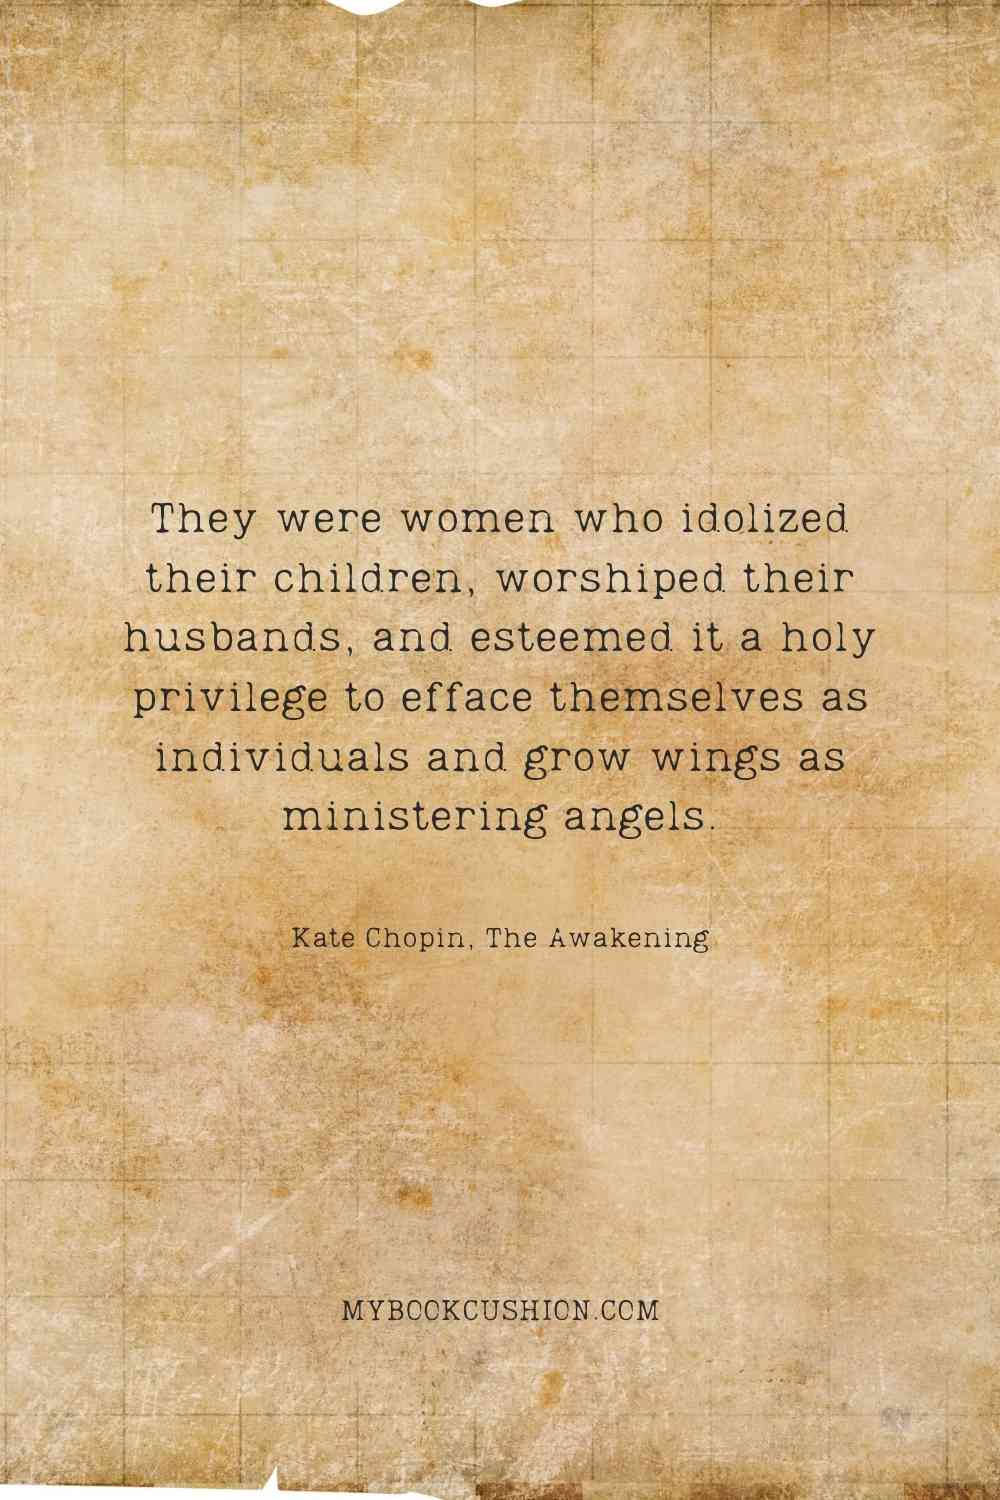 They were women who idolized their children, worshiped their husbands, and esteemed it a holy privilege to efface themselves as individuals and grow wings as ministering angels. - Kate Chopin, The Awakening